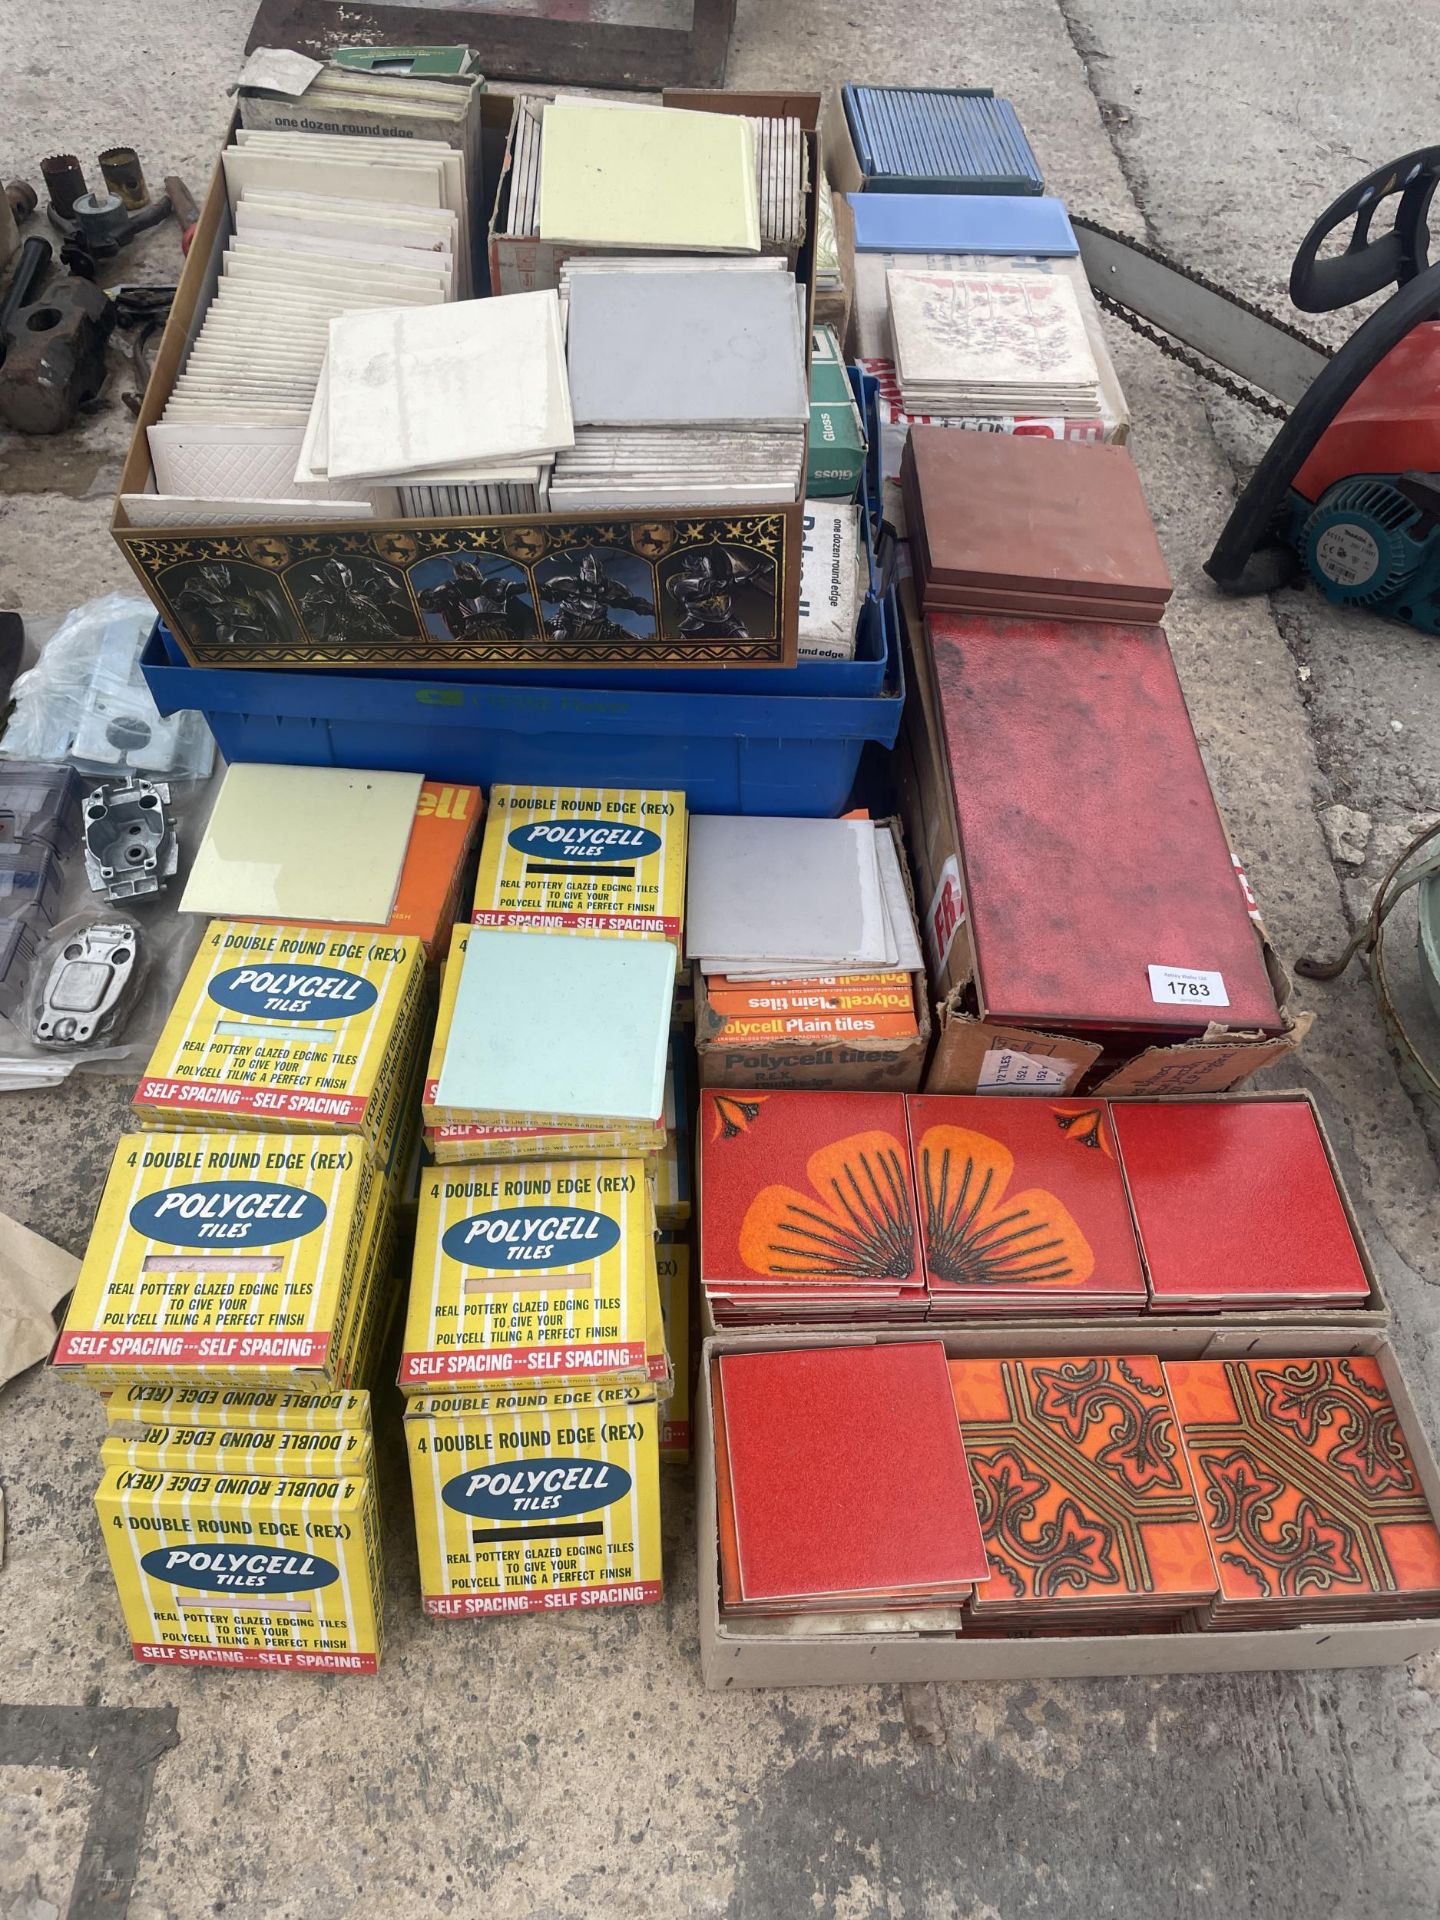 A LARGE QUANTITY OF CERAMIC WALL TILES